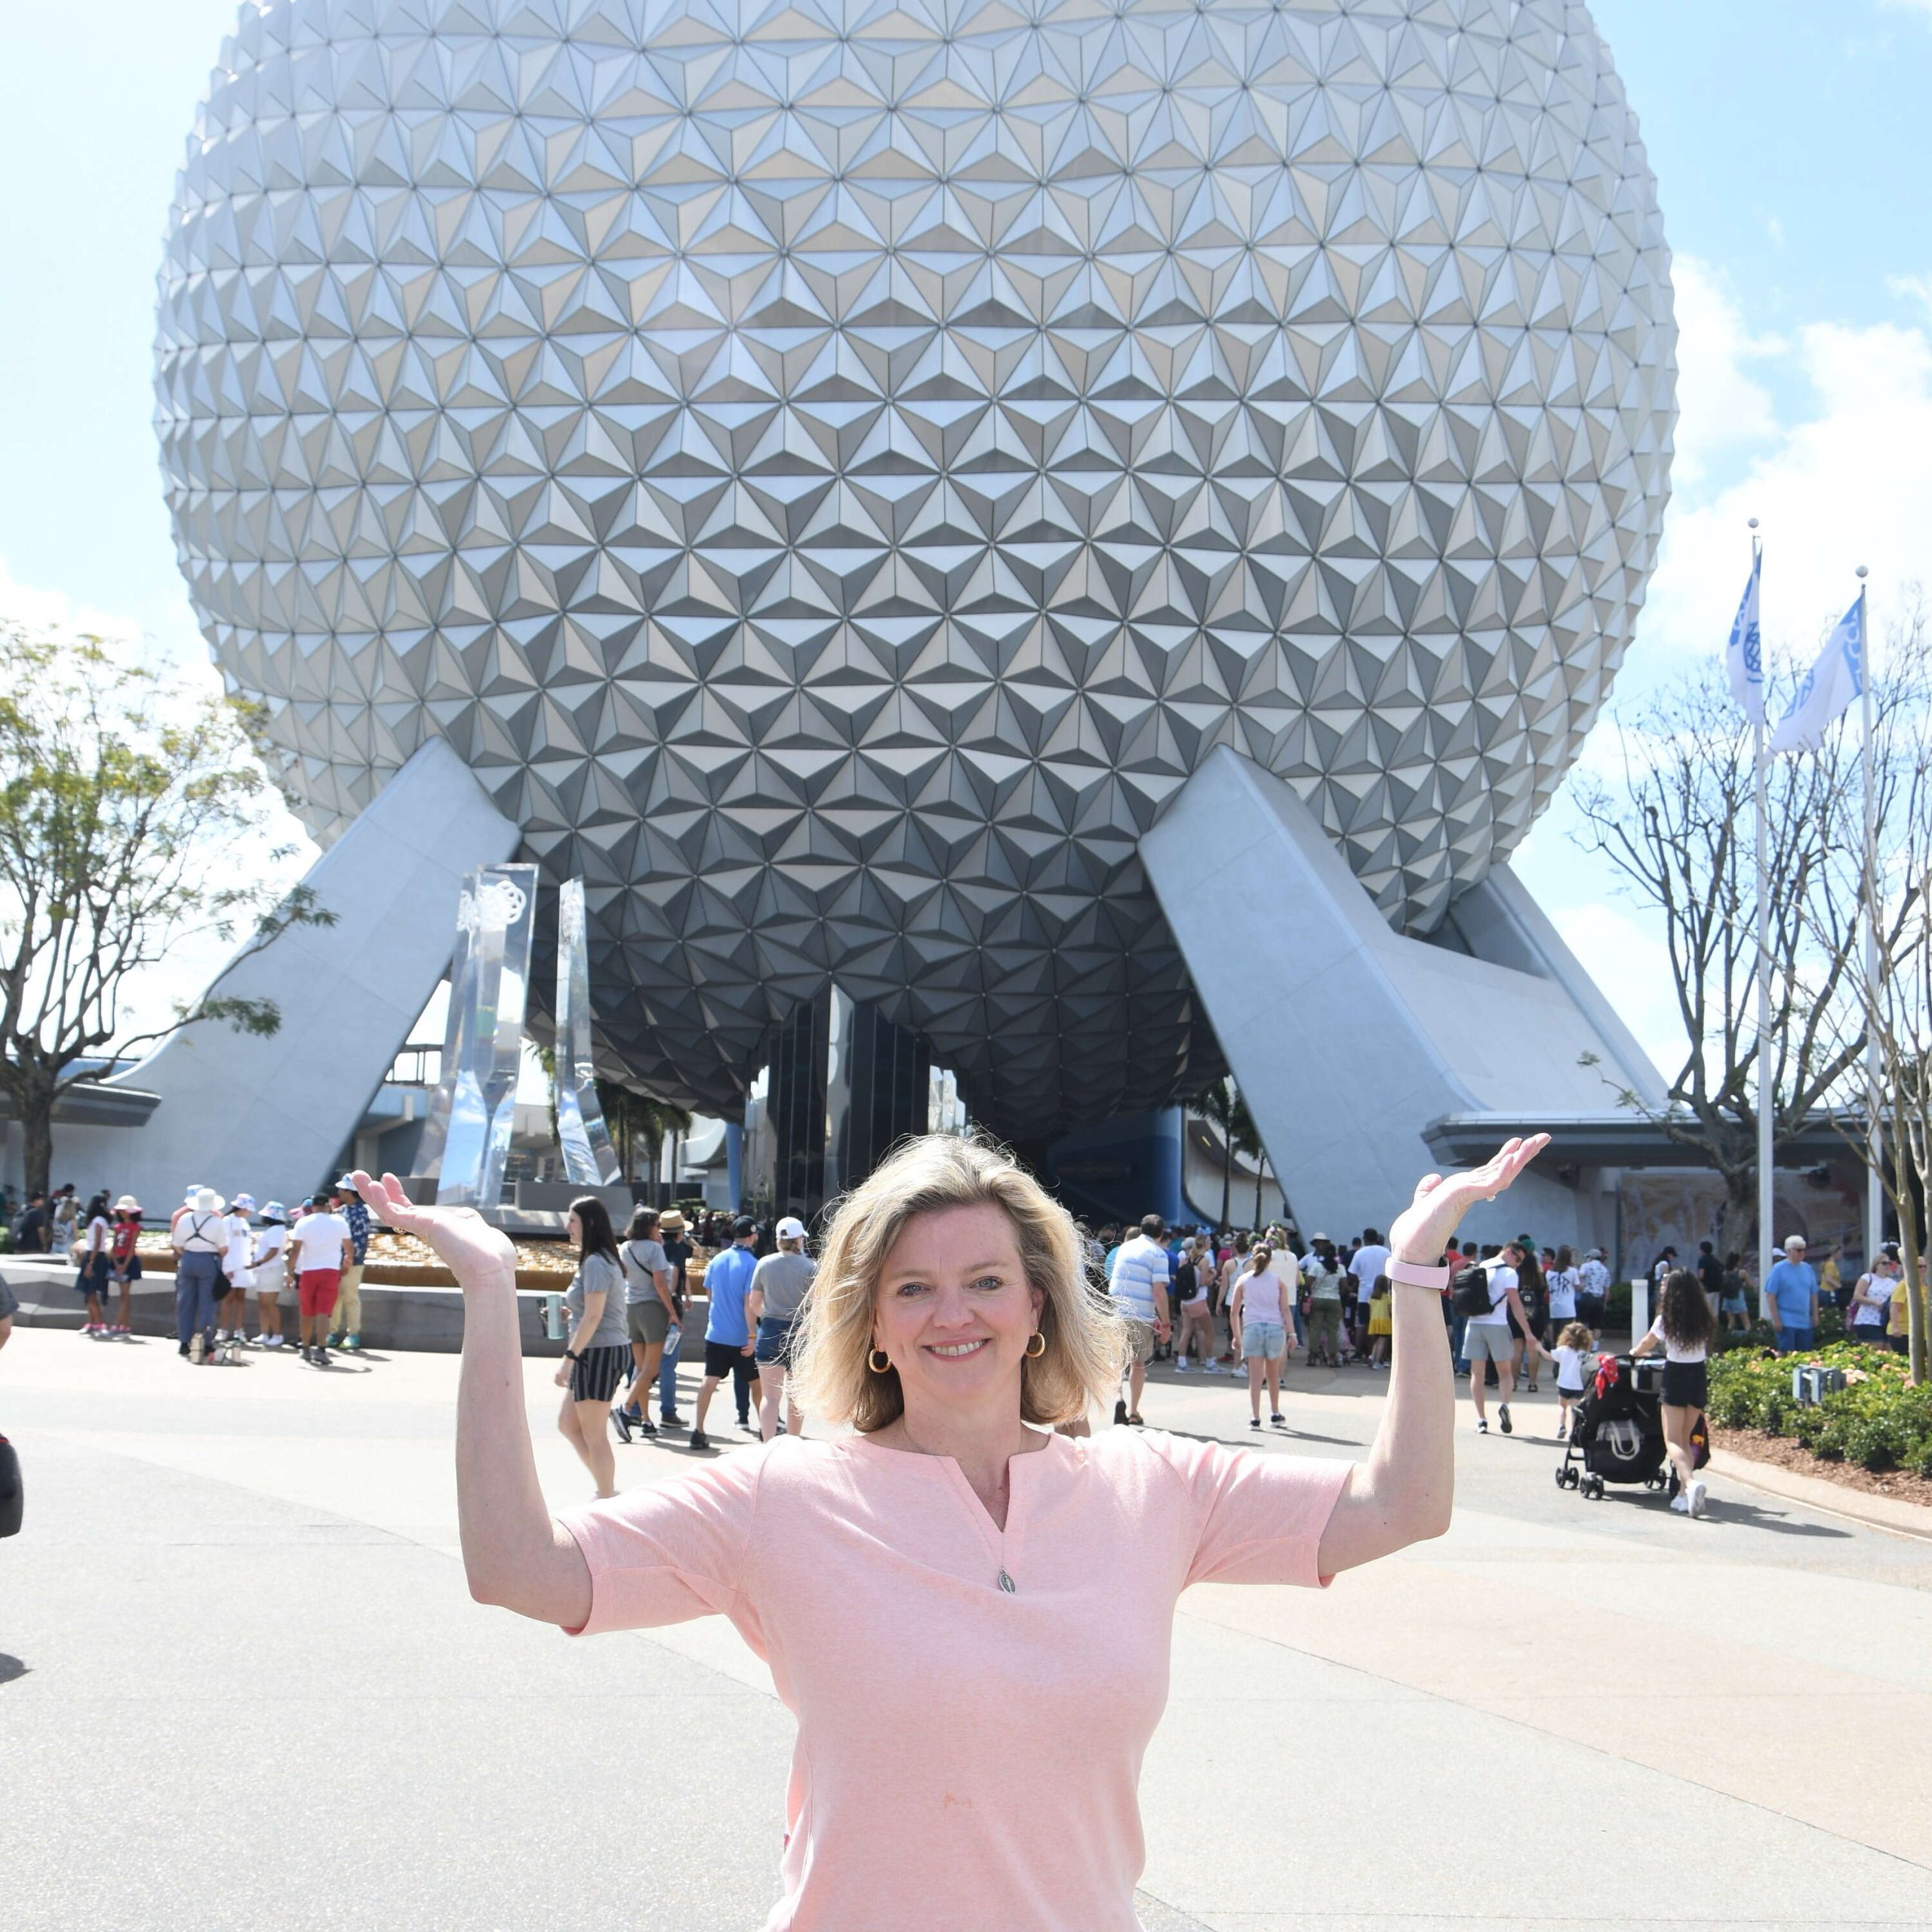 A woman standing in front of the epcot spaceship.